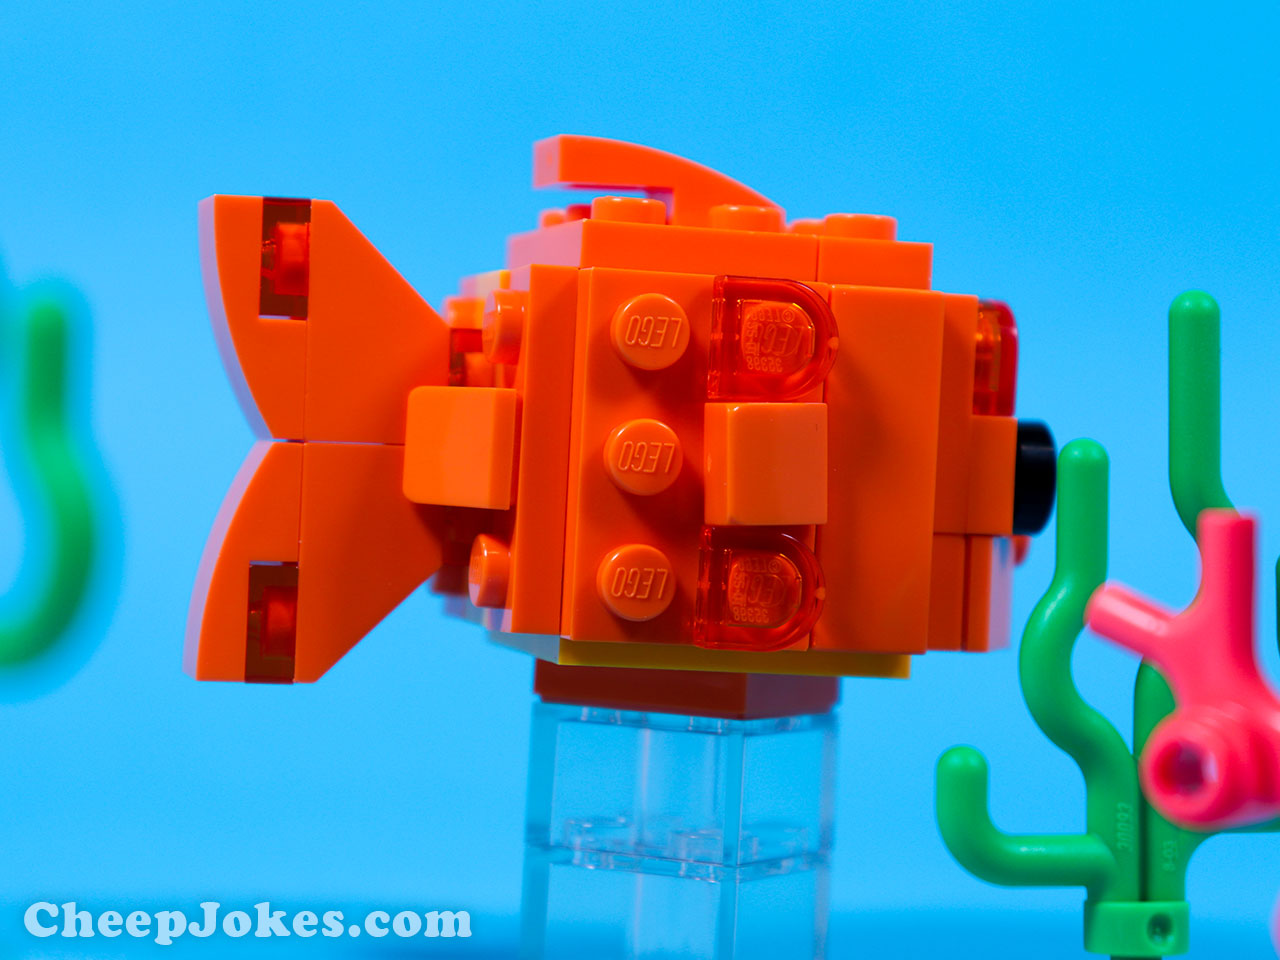 Kids who love animals will adore this BrickHeadz™ Goldfish (40442) build-and-display set. The goldfish and fry both sit on iconic BrickHeadz stands and look as if they’re ready to blow bubbles underwater. The stands fit into a sturdy, blue base that includes coral and plants and comes with 2 stickers – 1 with bubbles, 1 with corals – for decorating the base. This buildable pet set is a perfect gift for all kids, BrickHeadz collectors and pet lovers.